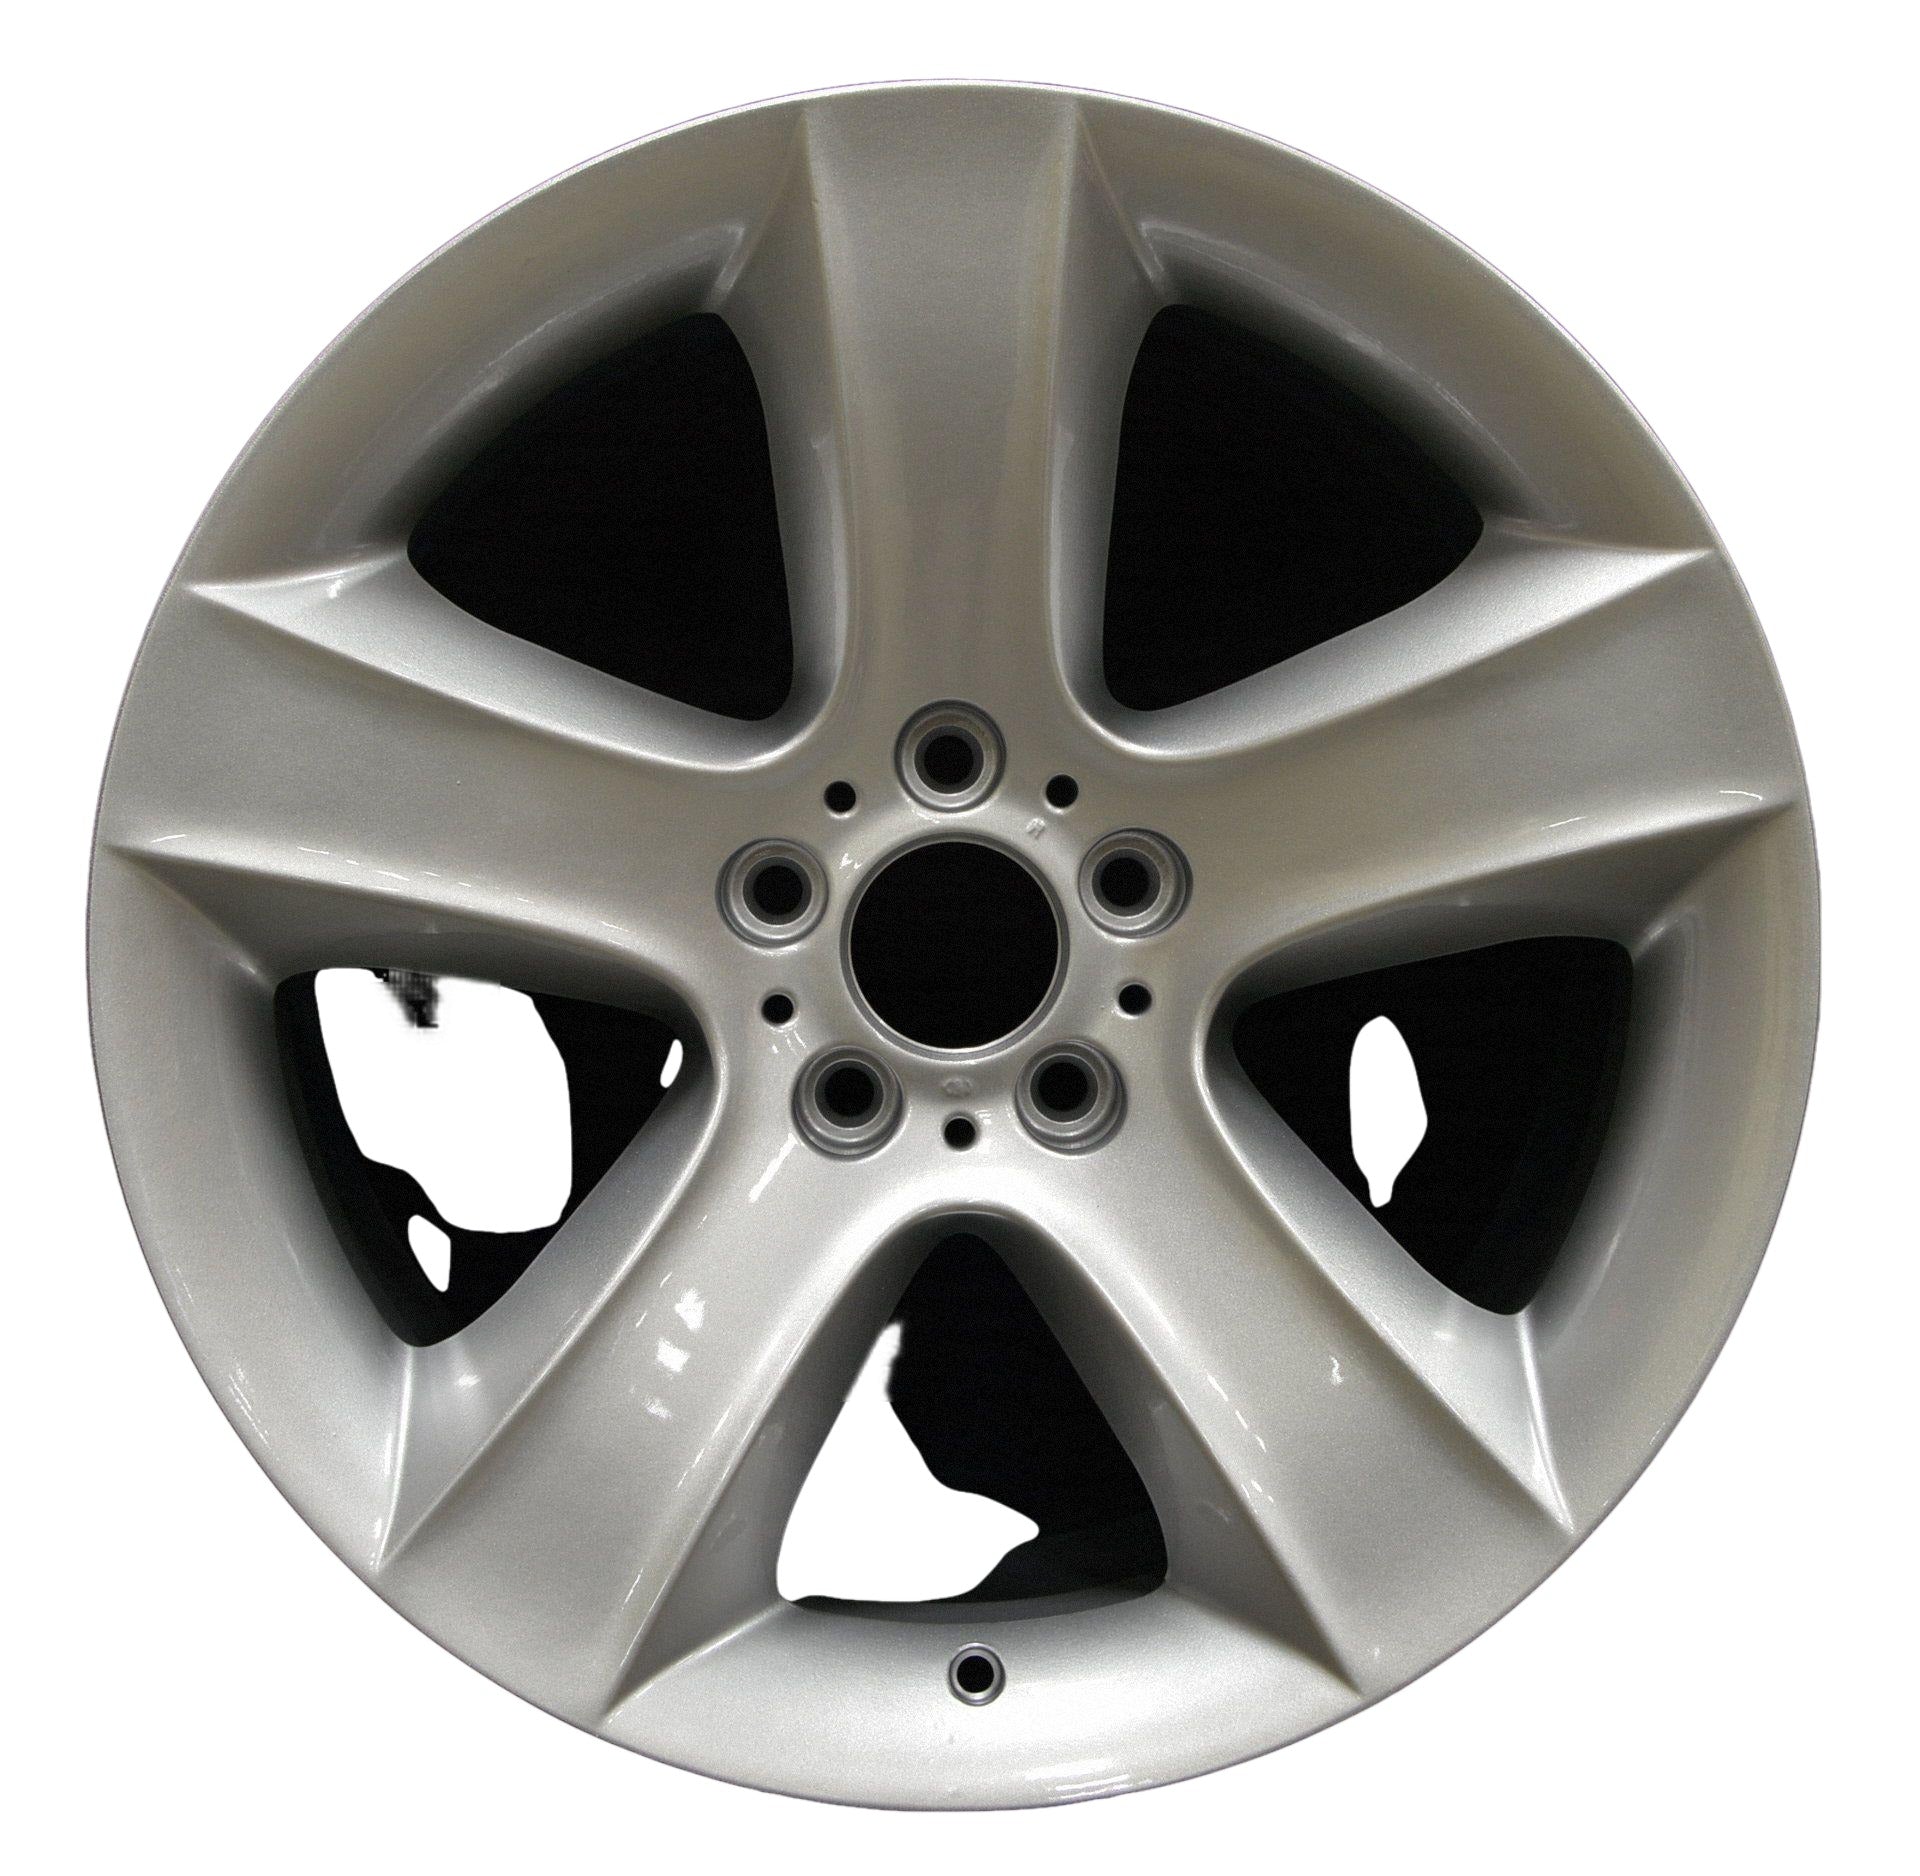 BMW X6  2008, 2009, 2010, 2011, 2012, 2013, 2014 Factory OEM Car Wheel Size 19x9 Alloy WAO.71278RE.PS10.FF